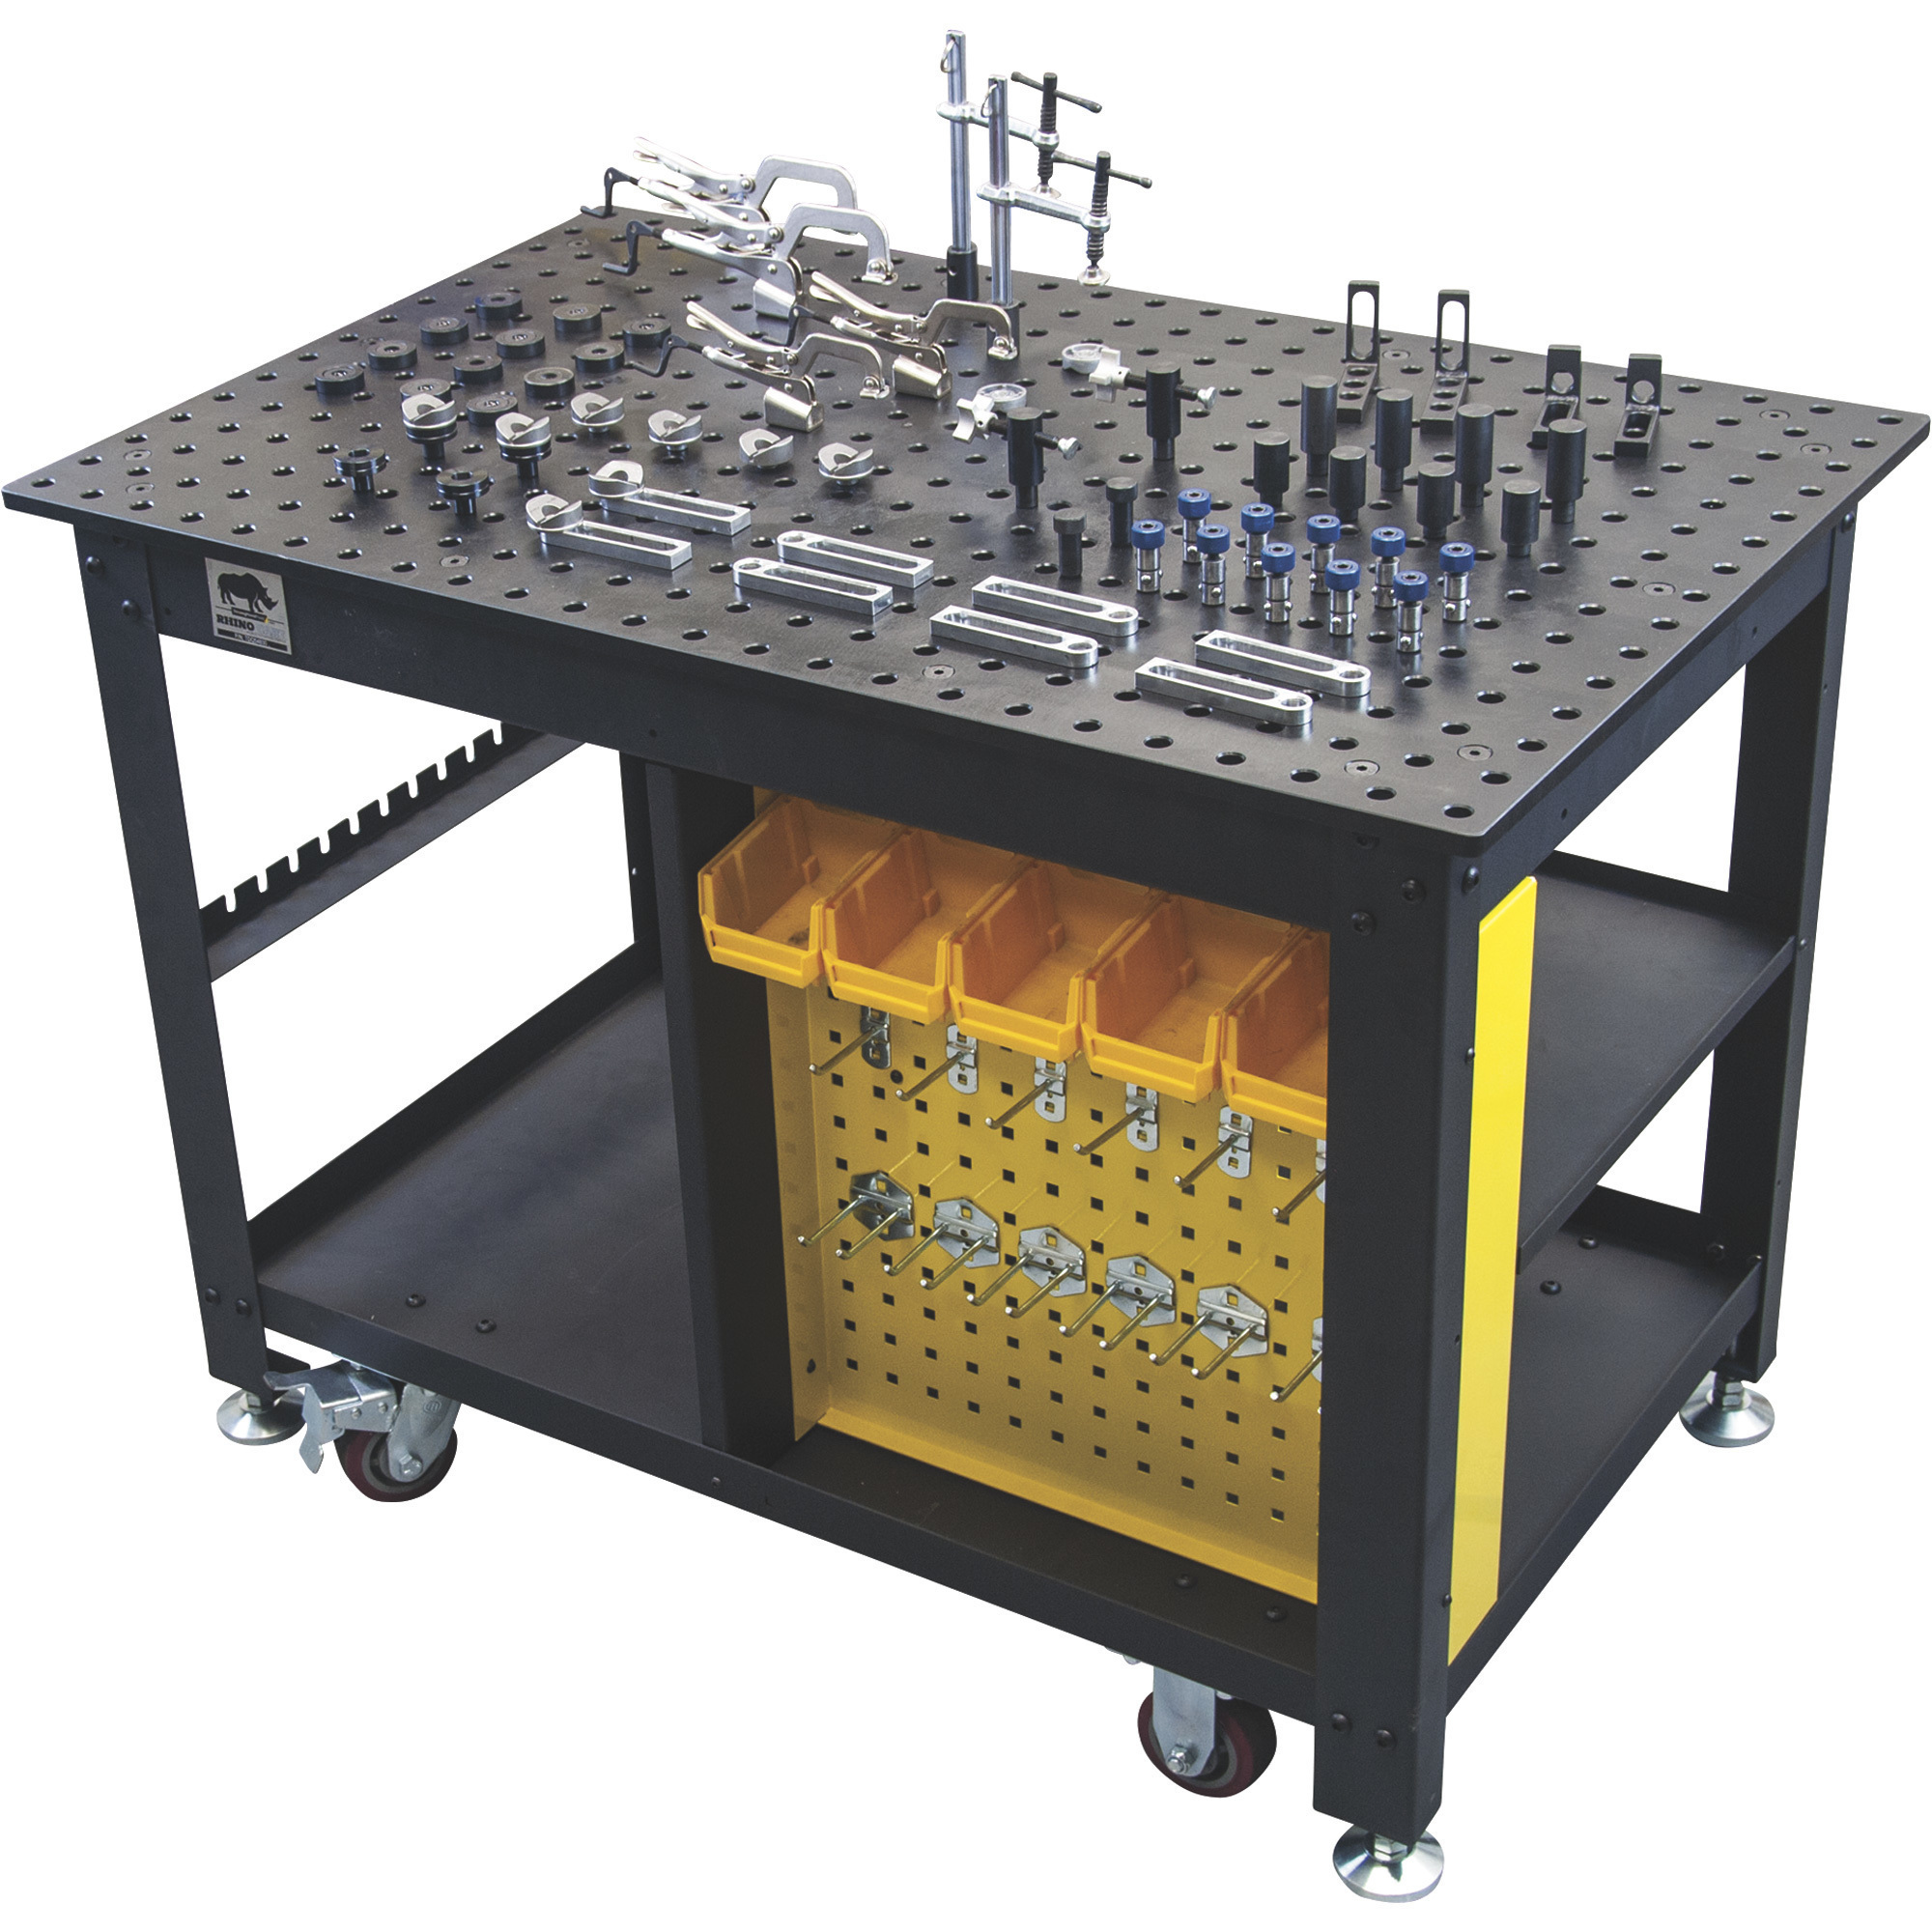 Rhino Cart Mobile Fixturing Welding Station with Fixture Kit, 66-Pcs., Model TD5-4830Q-K1